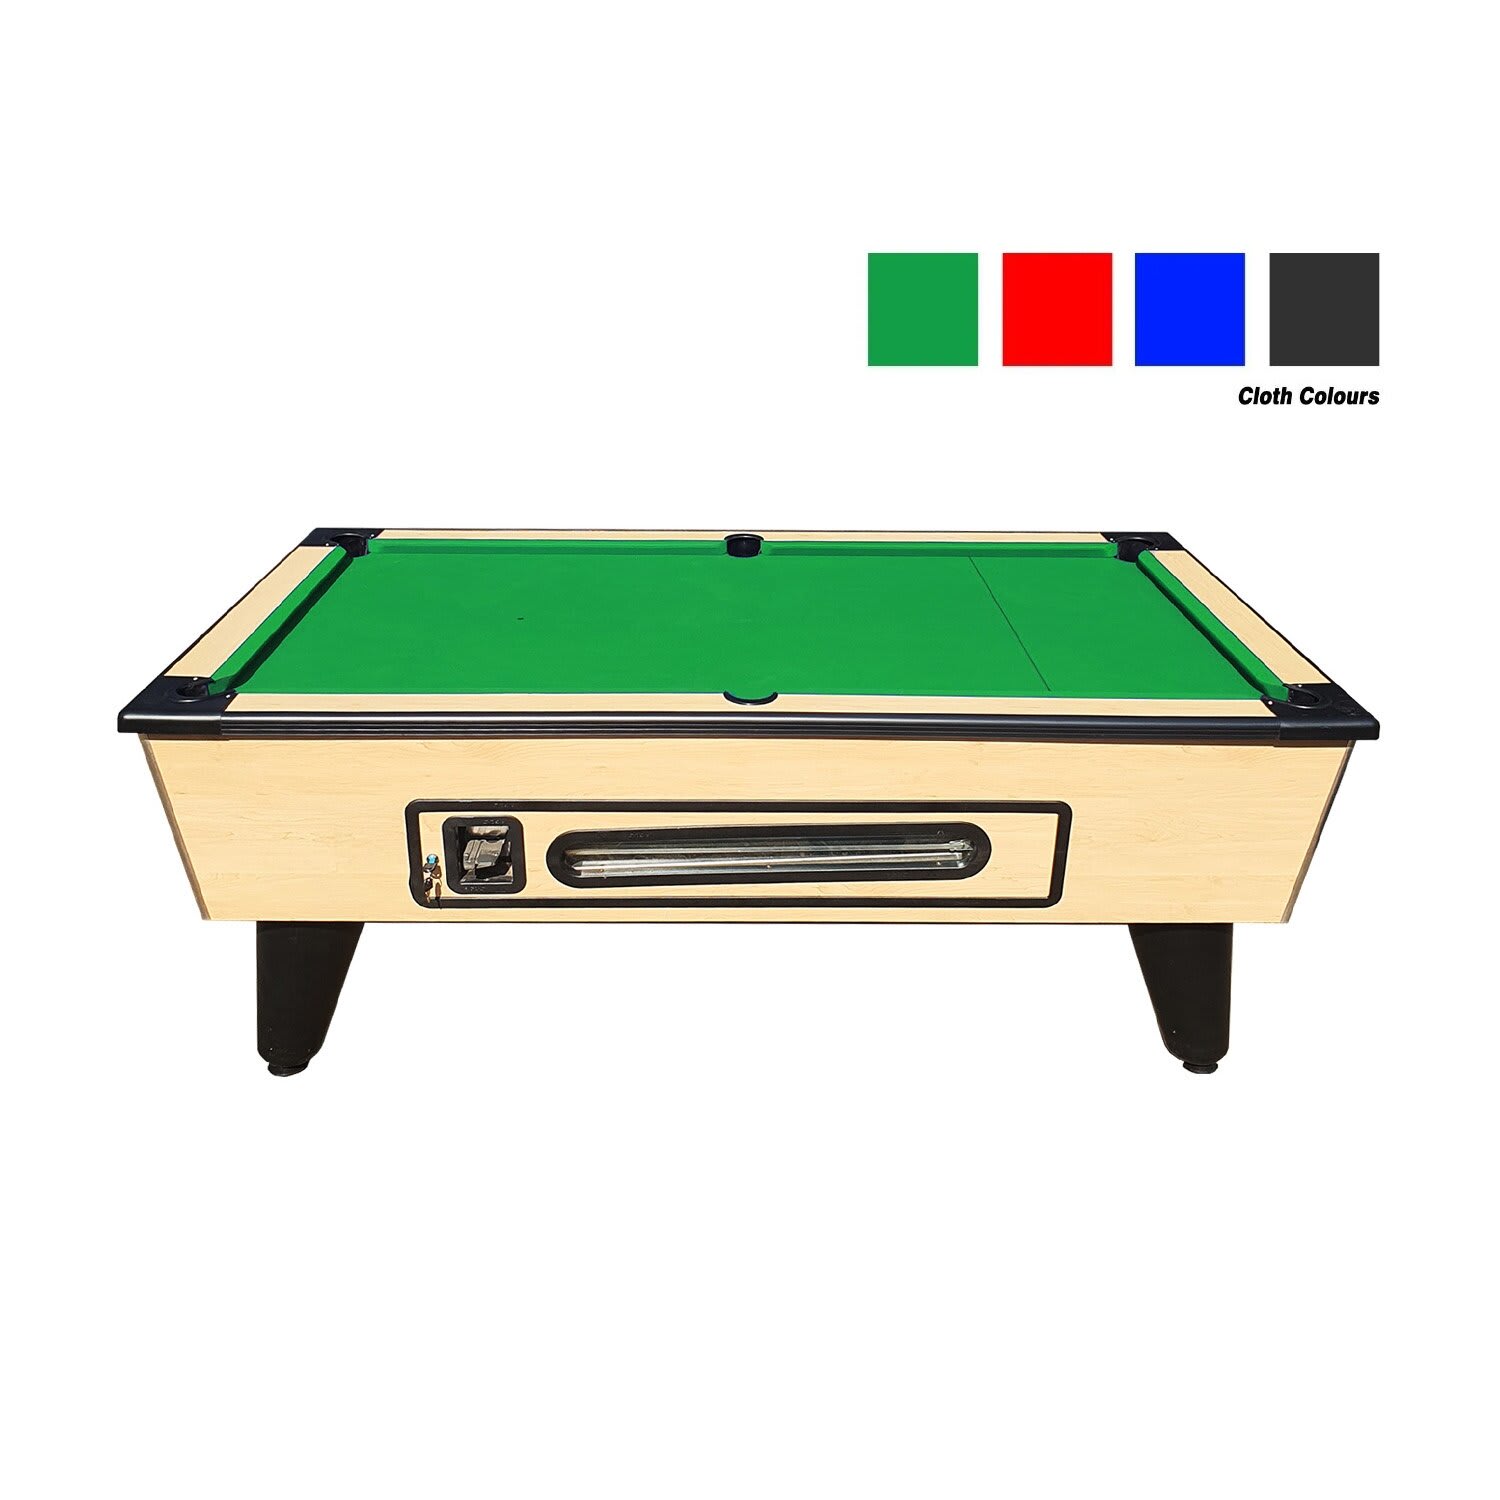 Buy Marvelous Cheap Coin Operated Pool Tables - bitcoinhelp.fun